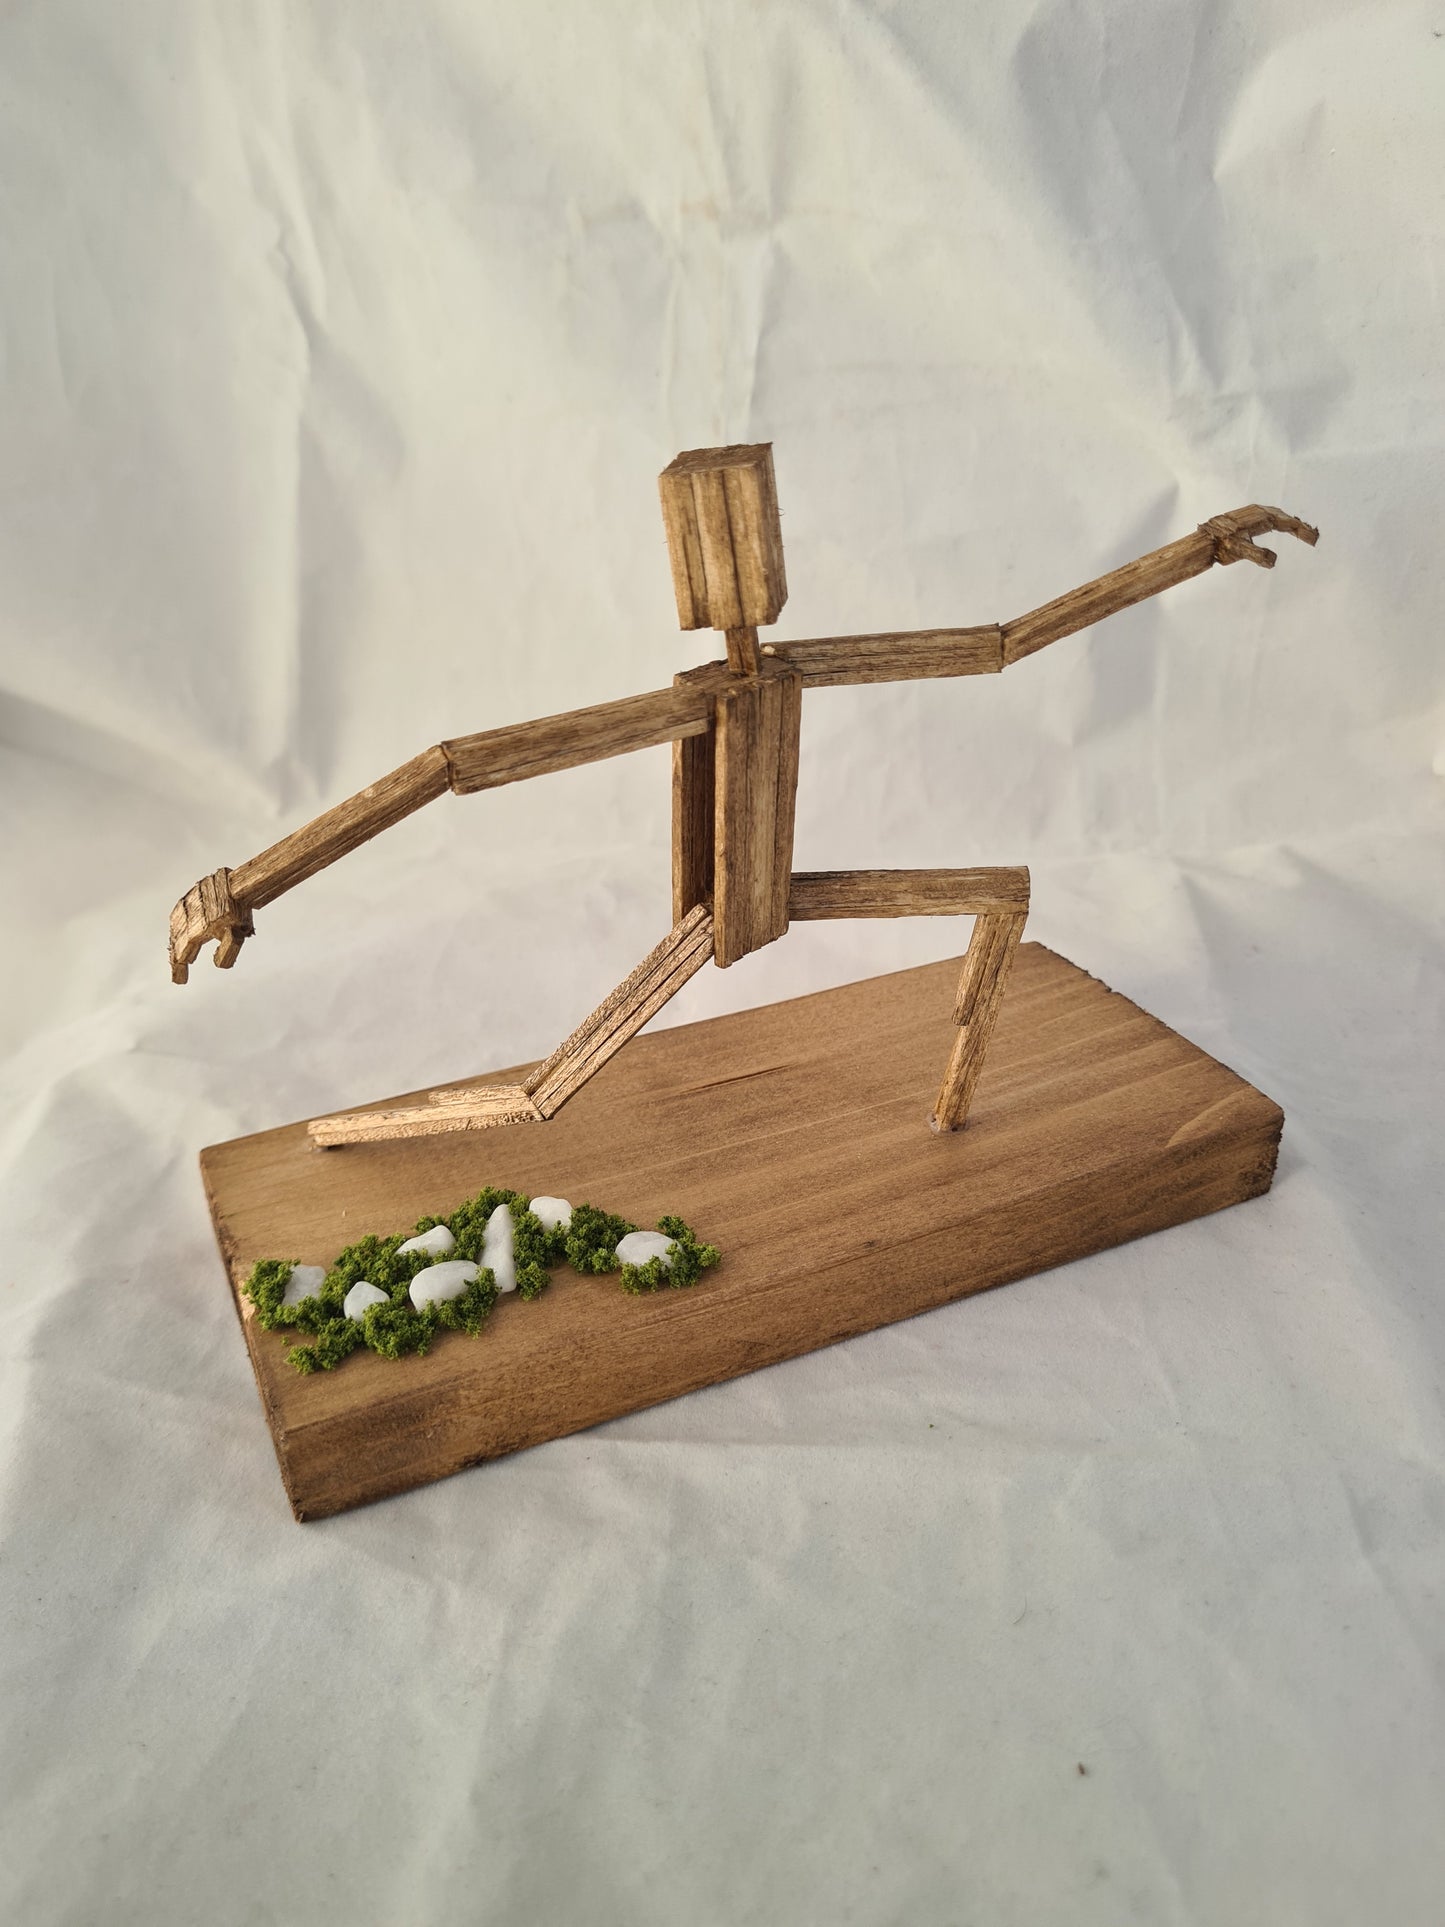 Warrior Pose - Handcrafted Wooden Matchstick Figures - Gifts, Ornaments and Decor By Tiggidy Designs